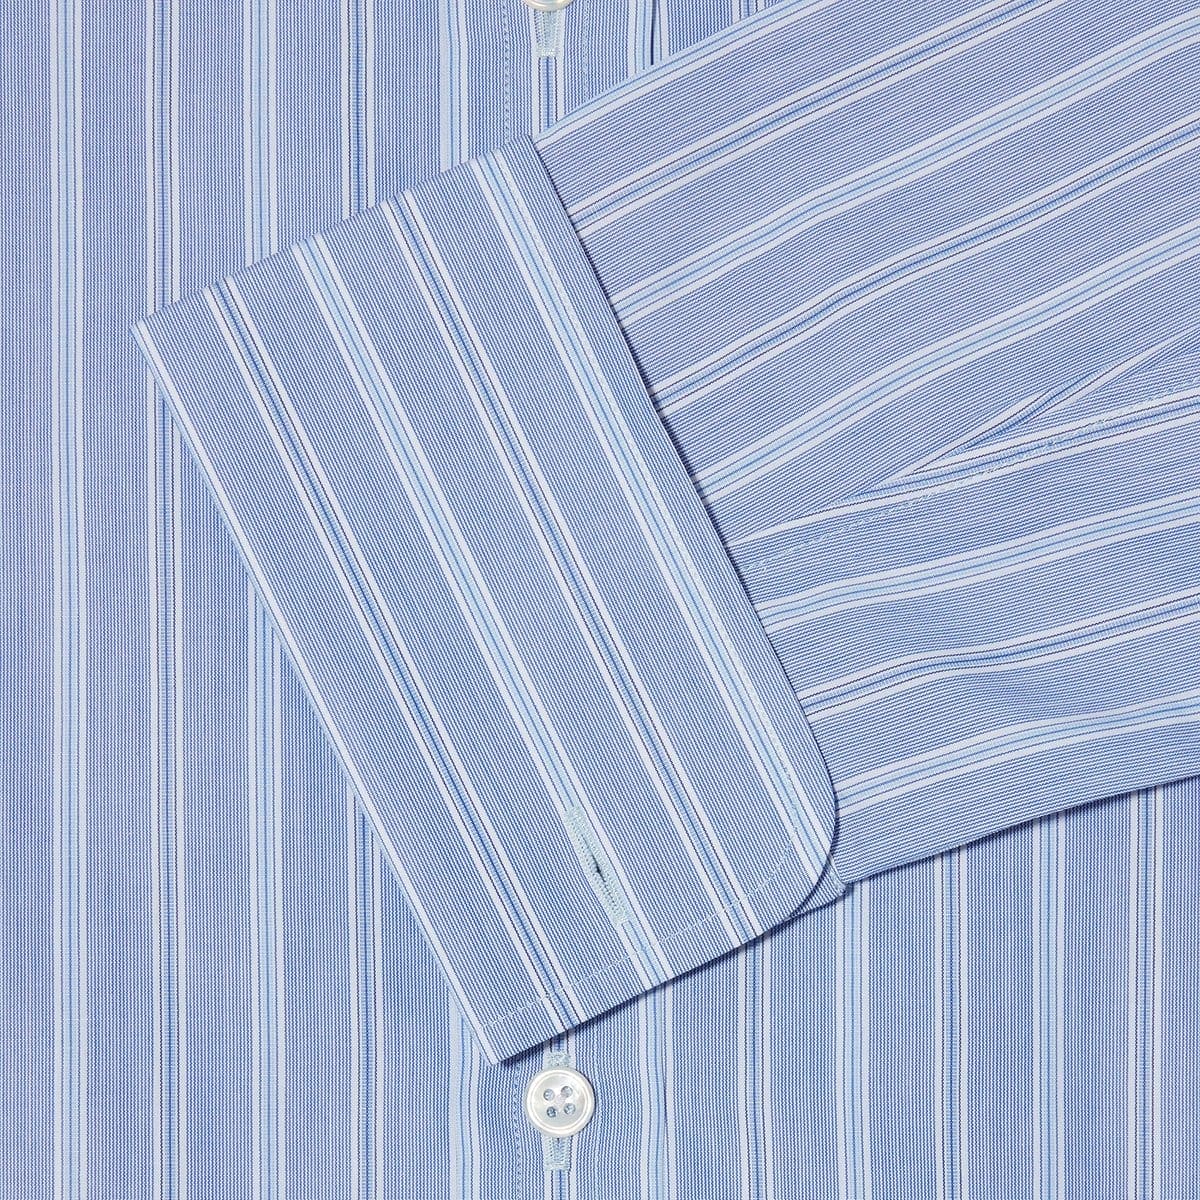 Contemporary Fit, Classic Collar, Double Cuff Shirt in a Blue, Navy & White Stripe Poplin Cotton